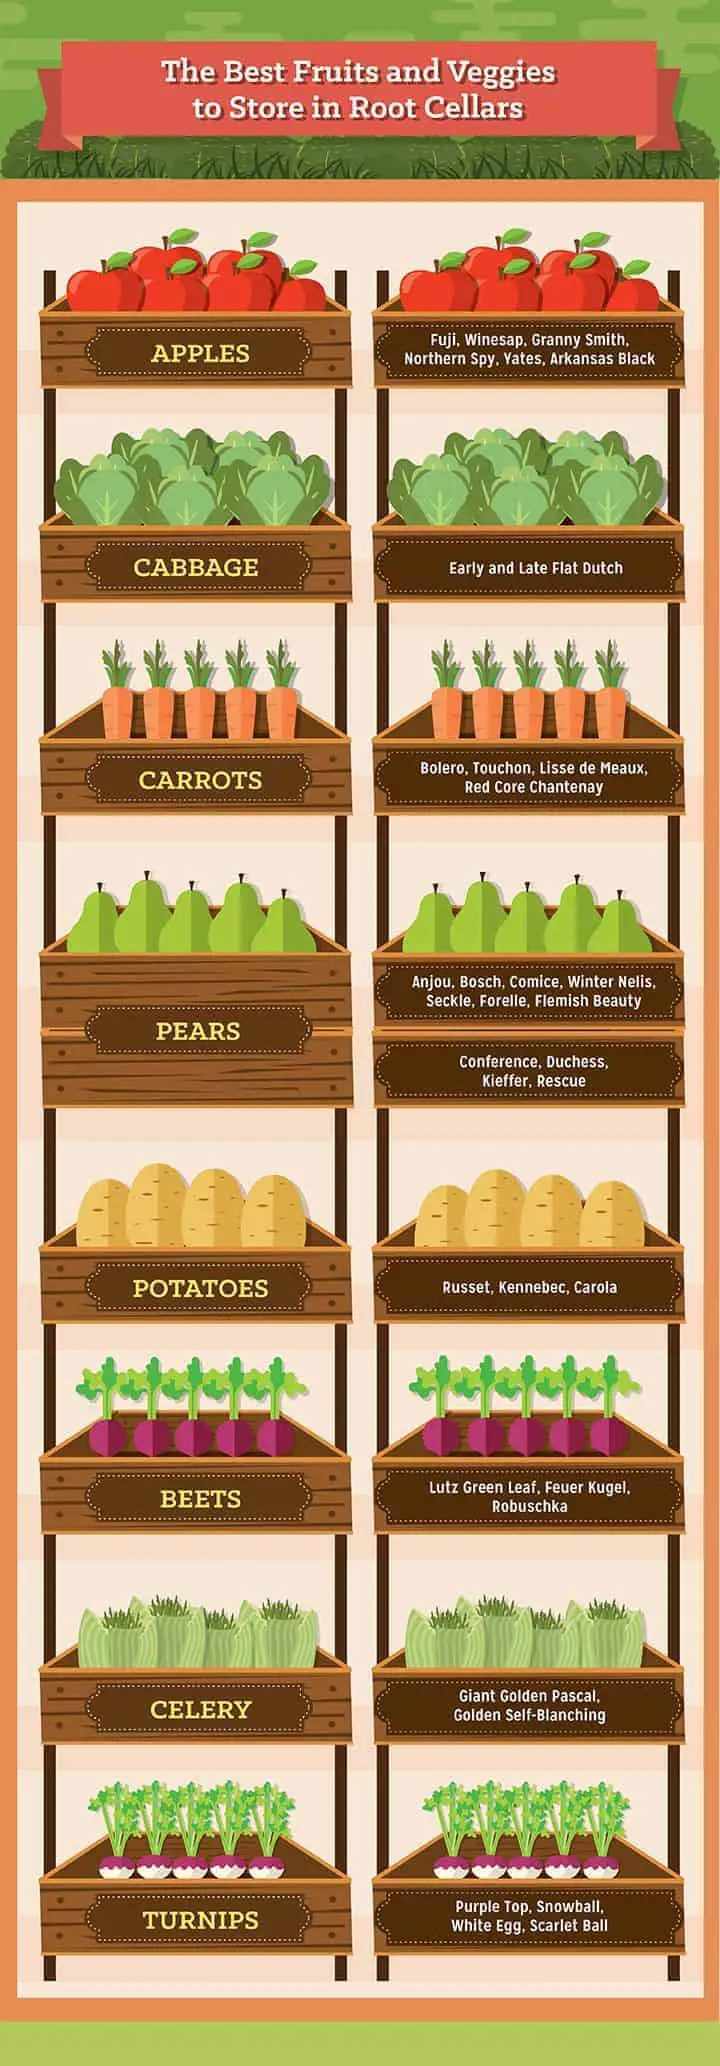 Crops for root cellar storage